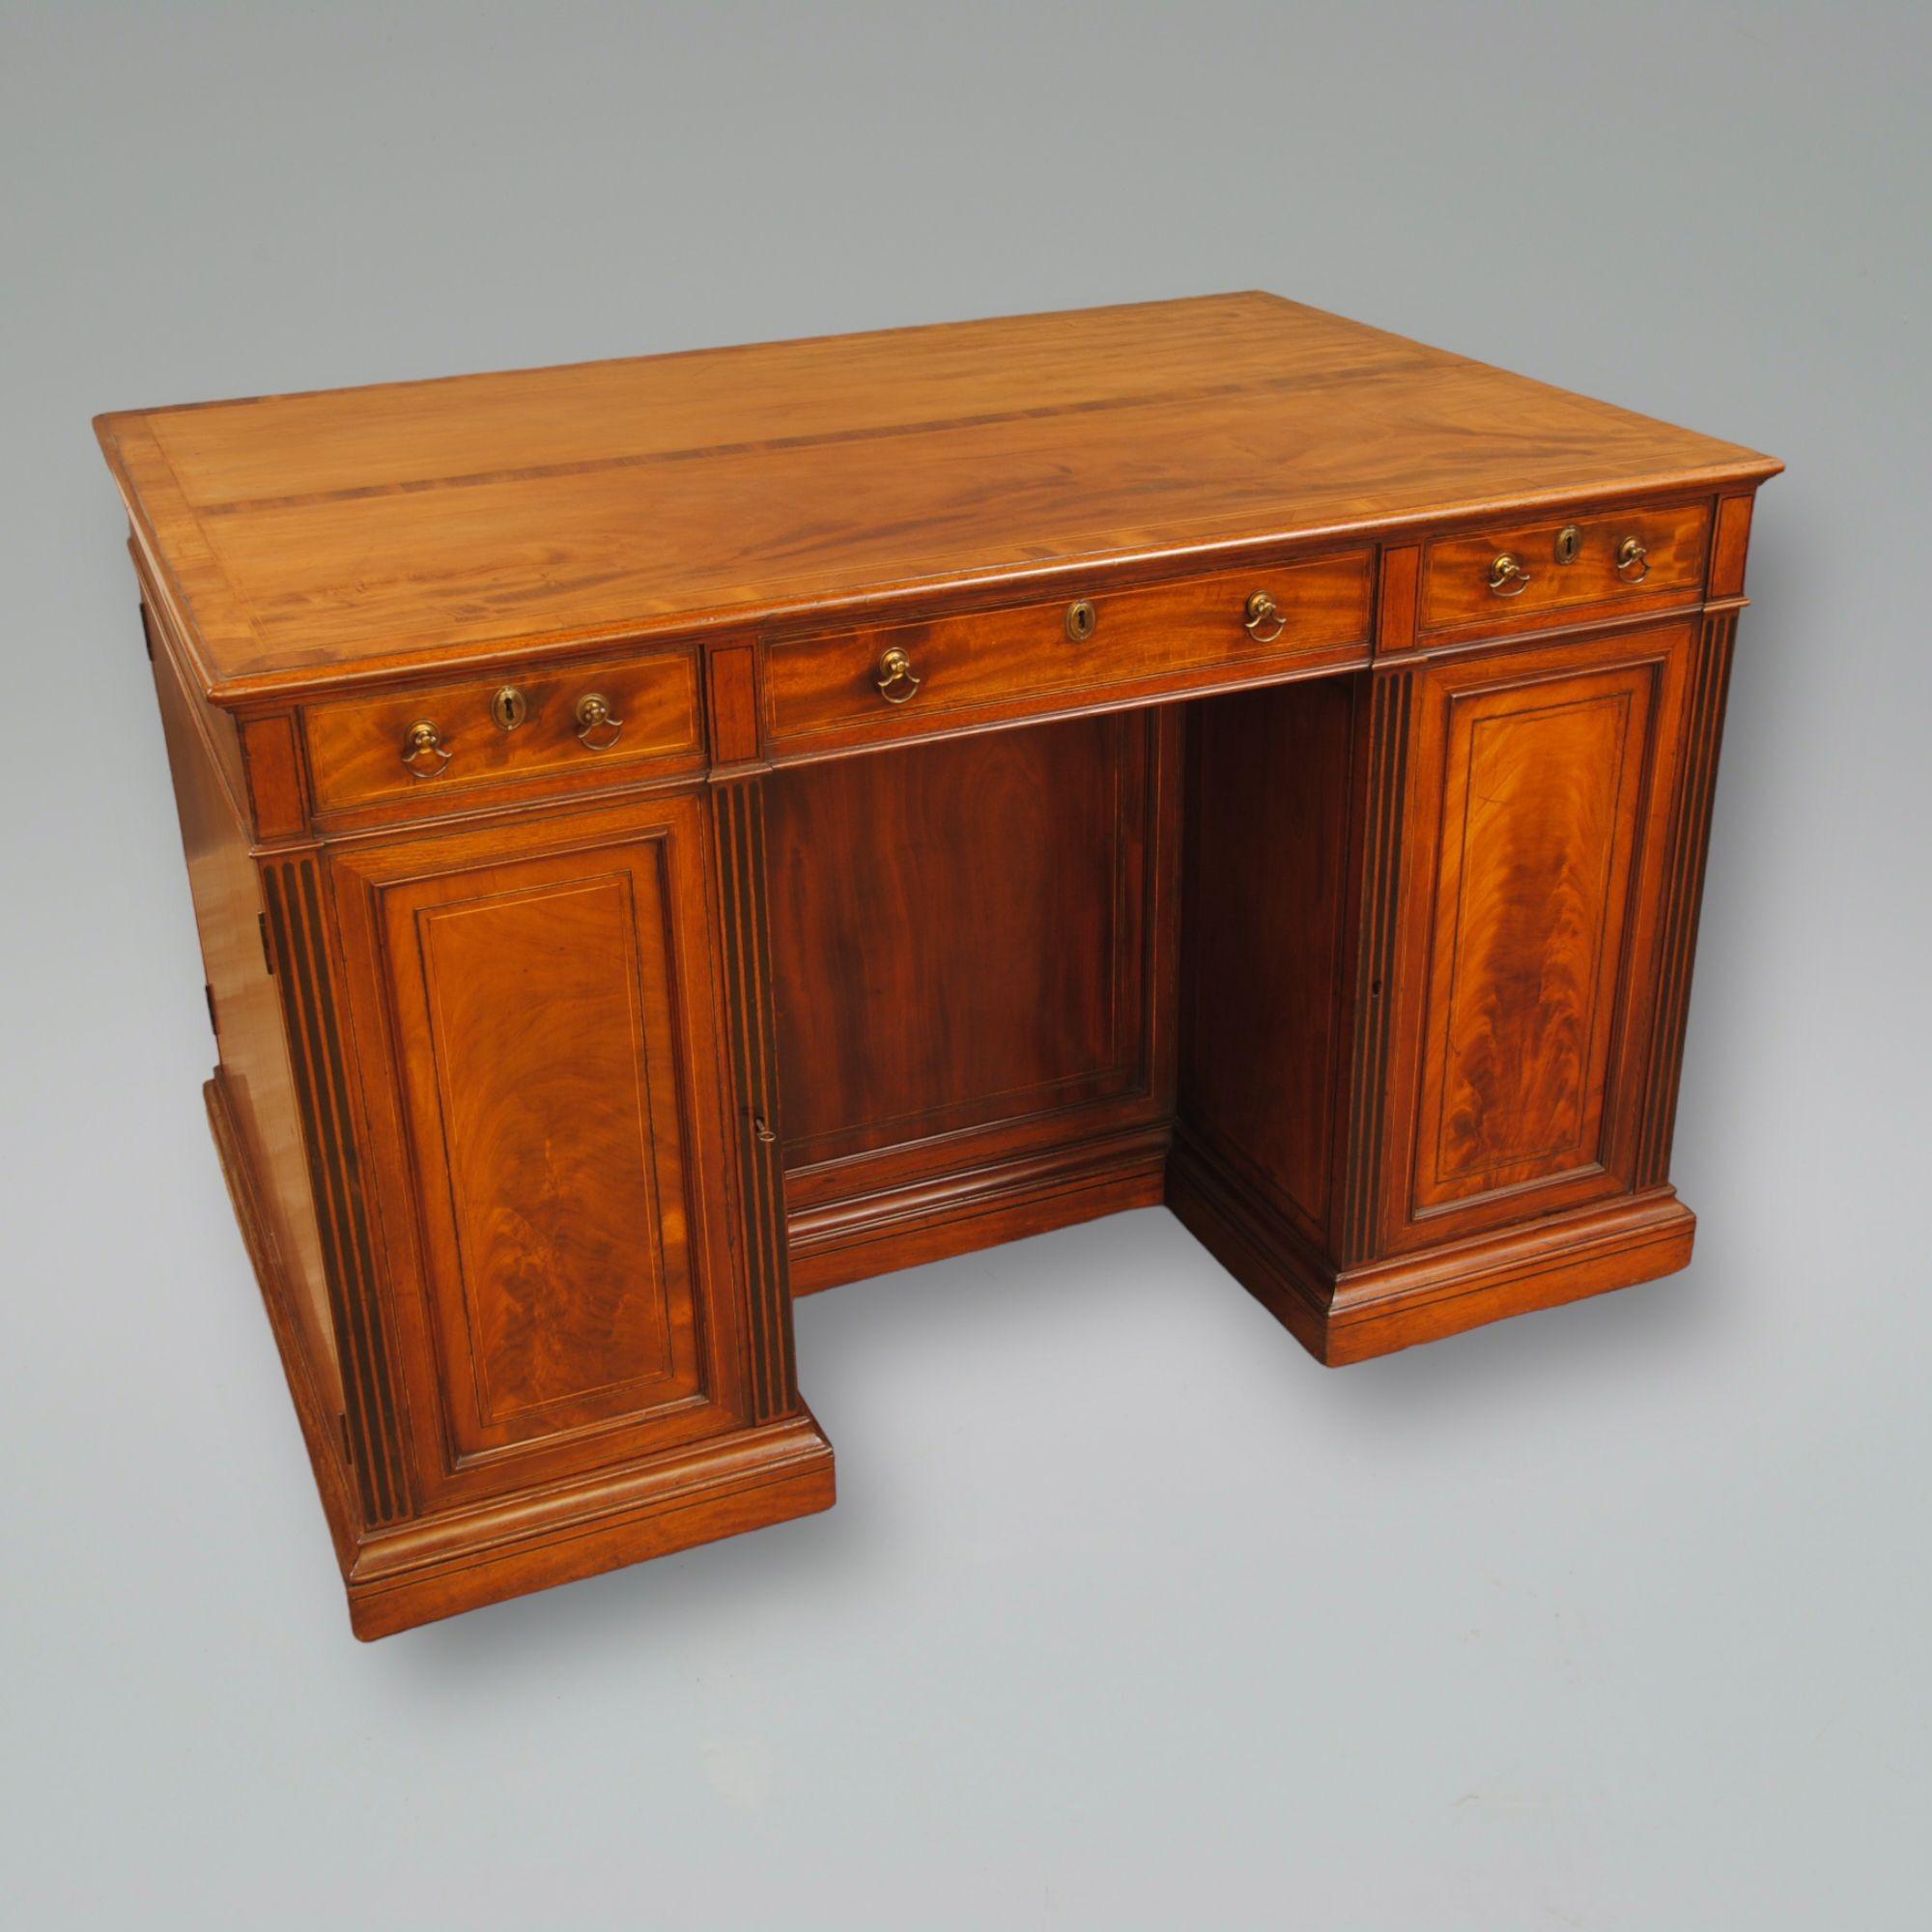 A fine quality late 18th century mahogany free standing library desk, the flame mahogany cupboards with ebony fluting to the sides of the kneehole, are fitted with drawers. The veneered top is cross banded and strung in boxwood. The other side has